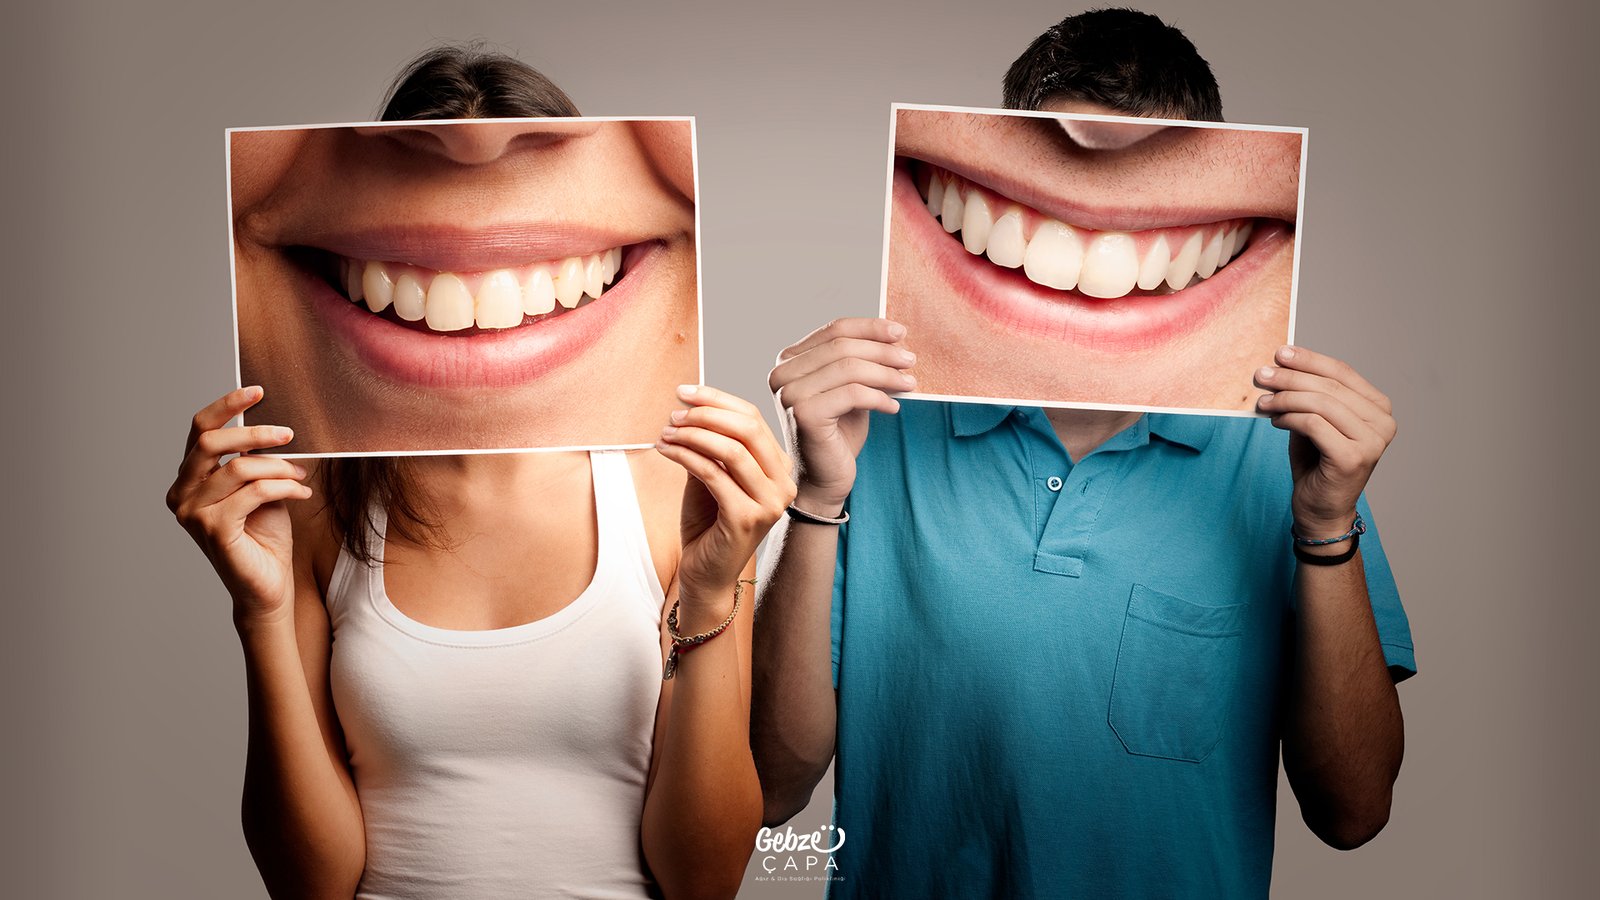 What is Smile Design?